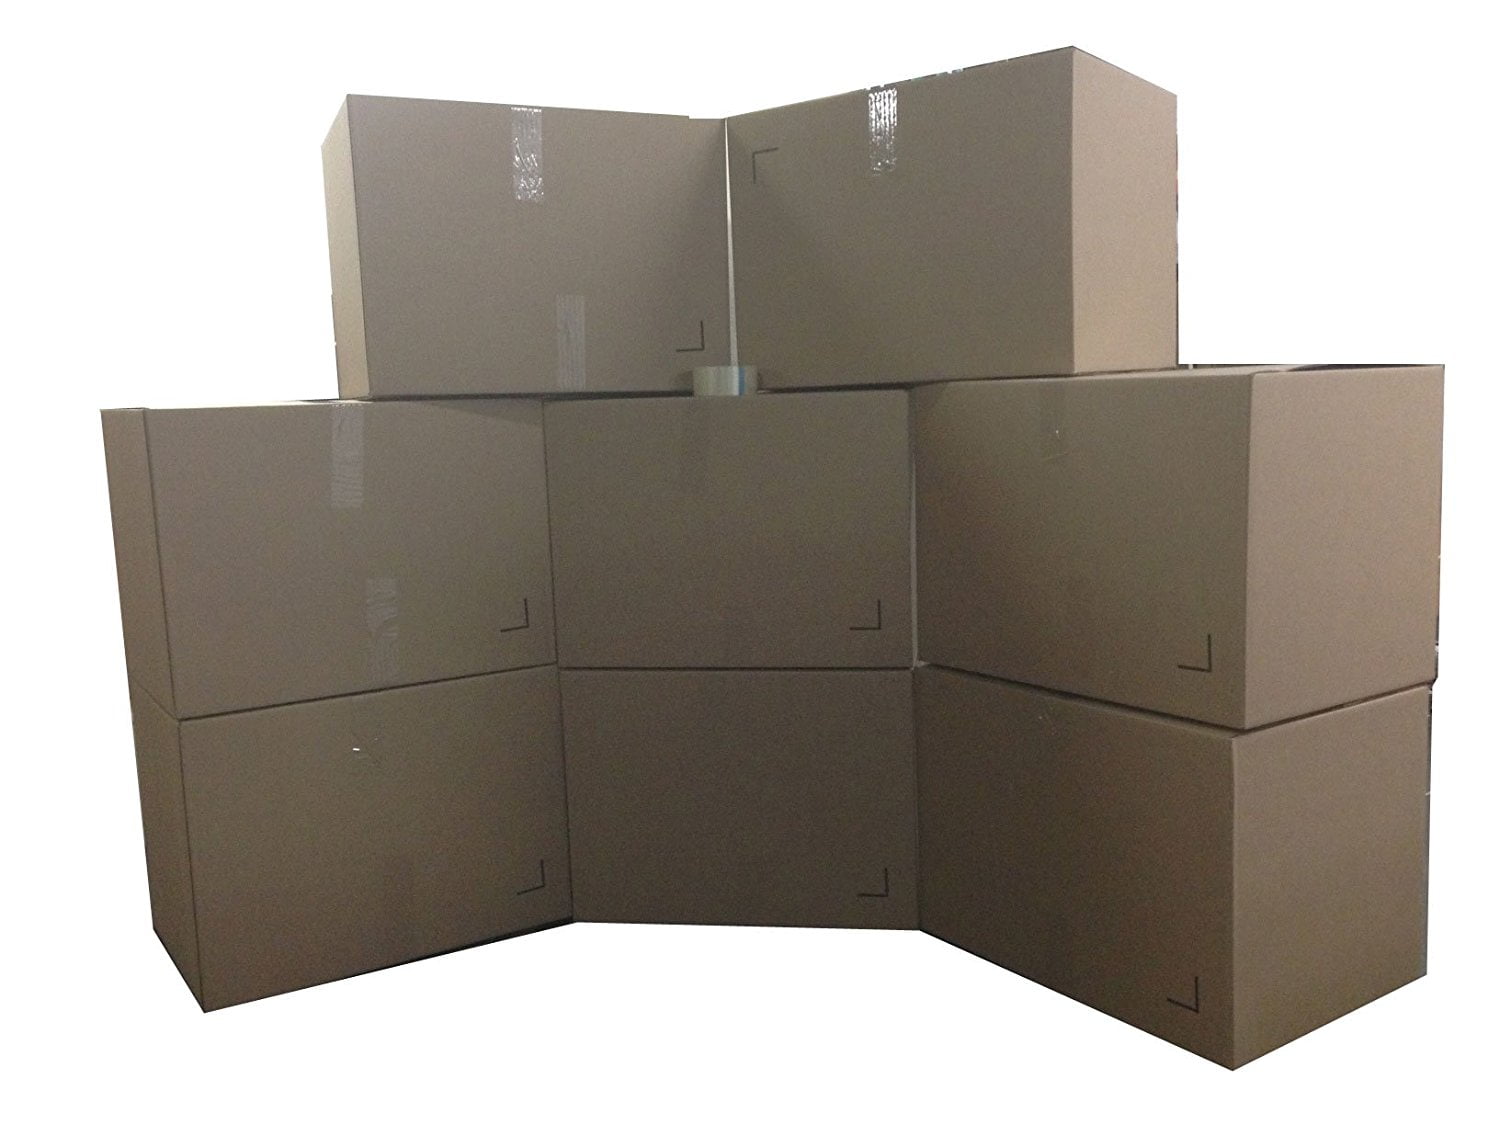 5 Boxes 24x18x18 44 ECT Heavy Duty - New for Packing or Shipping 